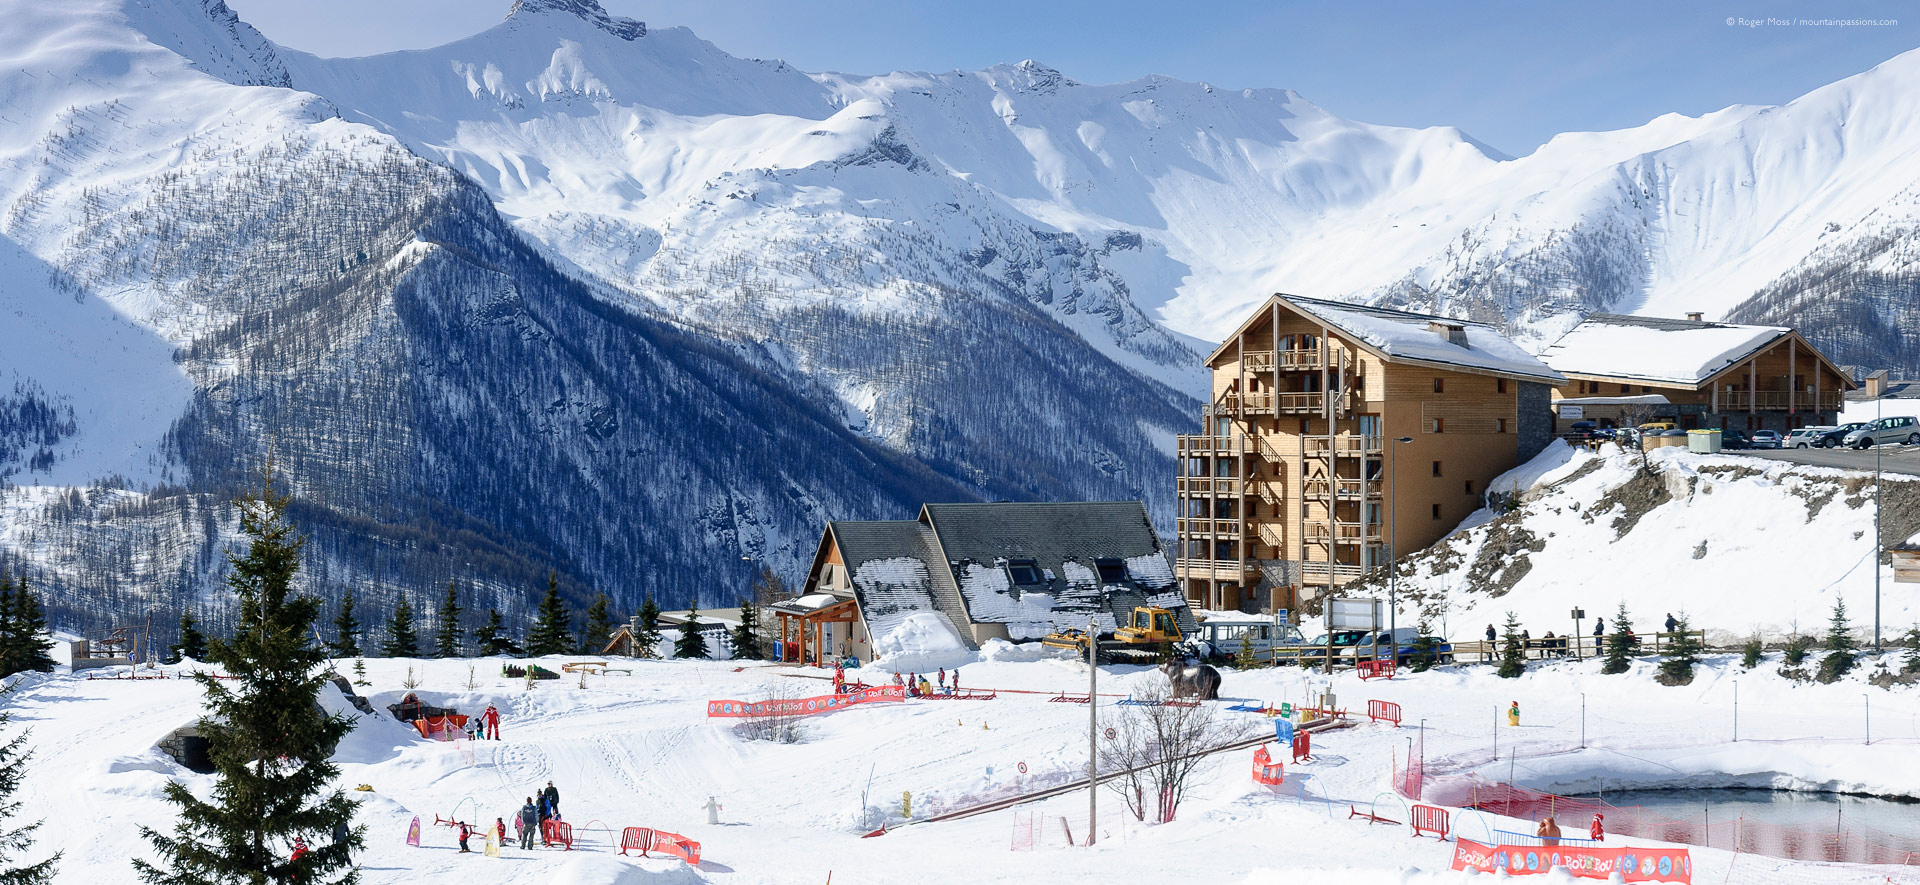 Wide view of children's ski school area, with apartments and mountains